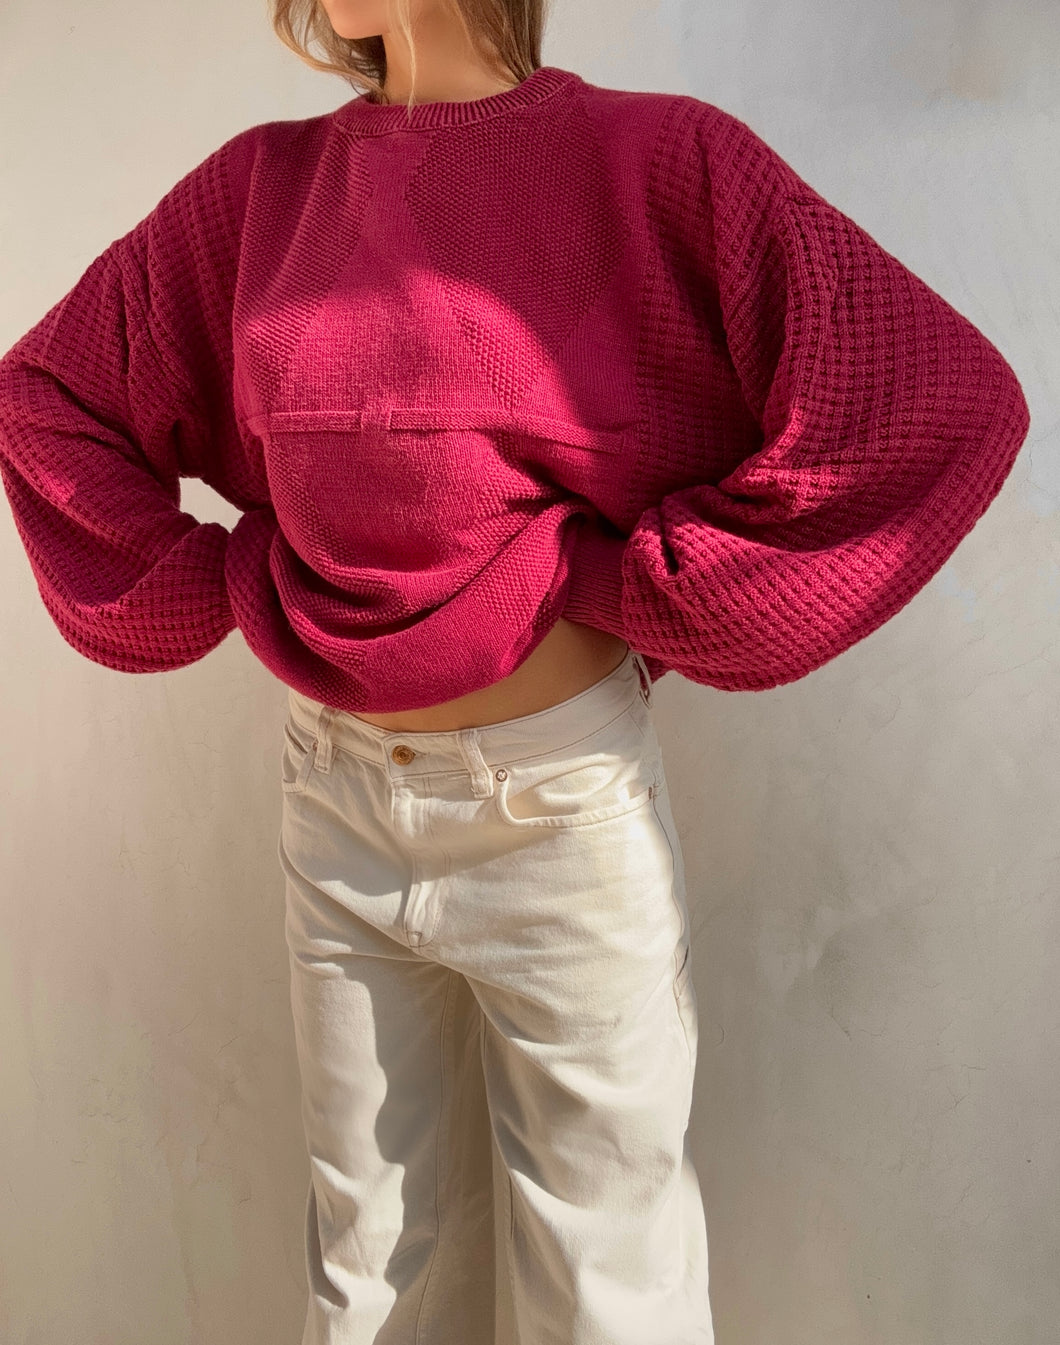 Vintage Christian Dior Knit Sweater